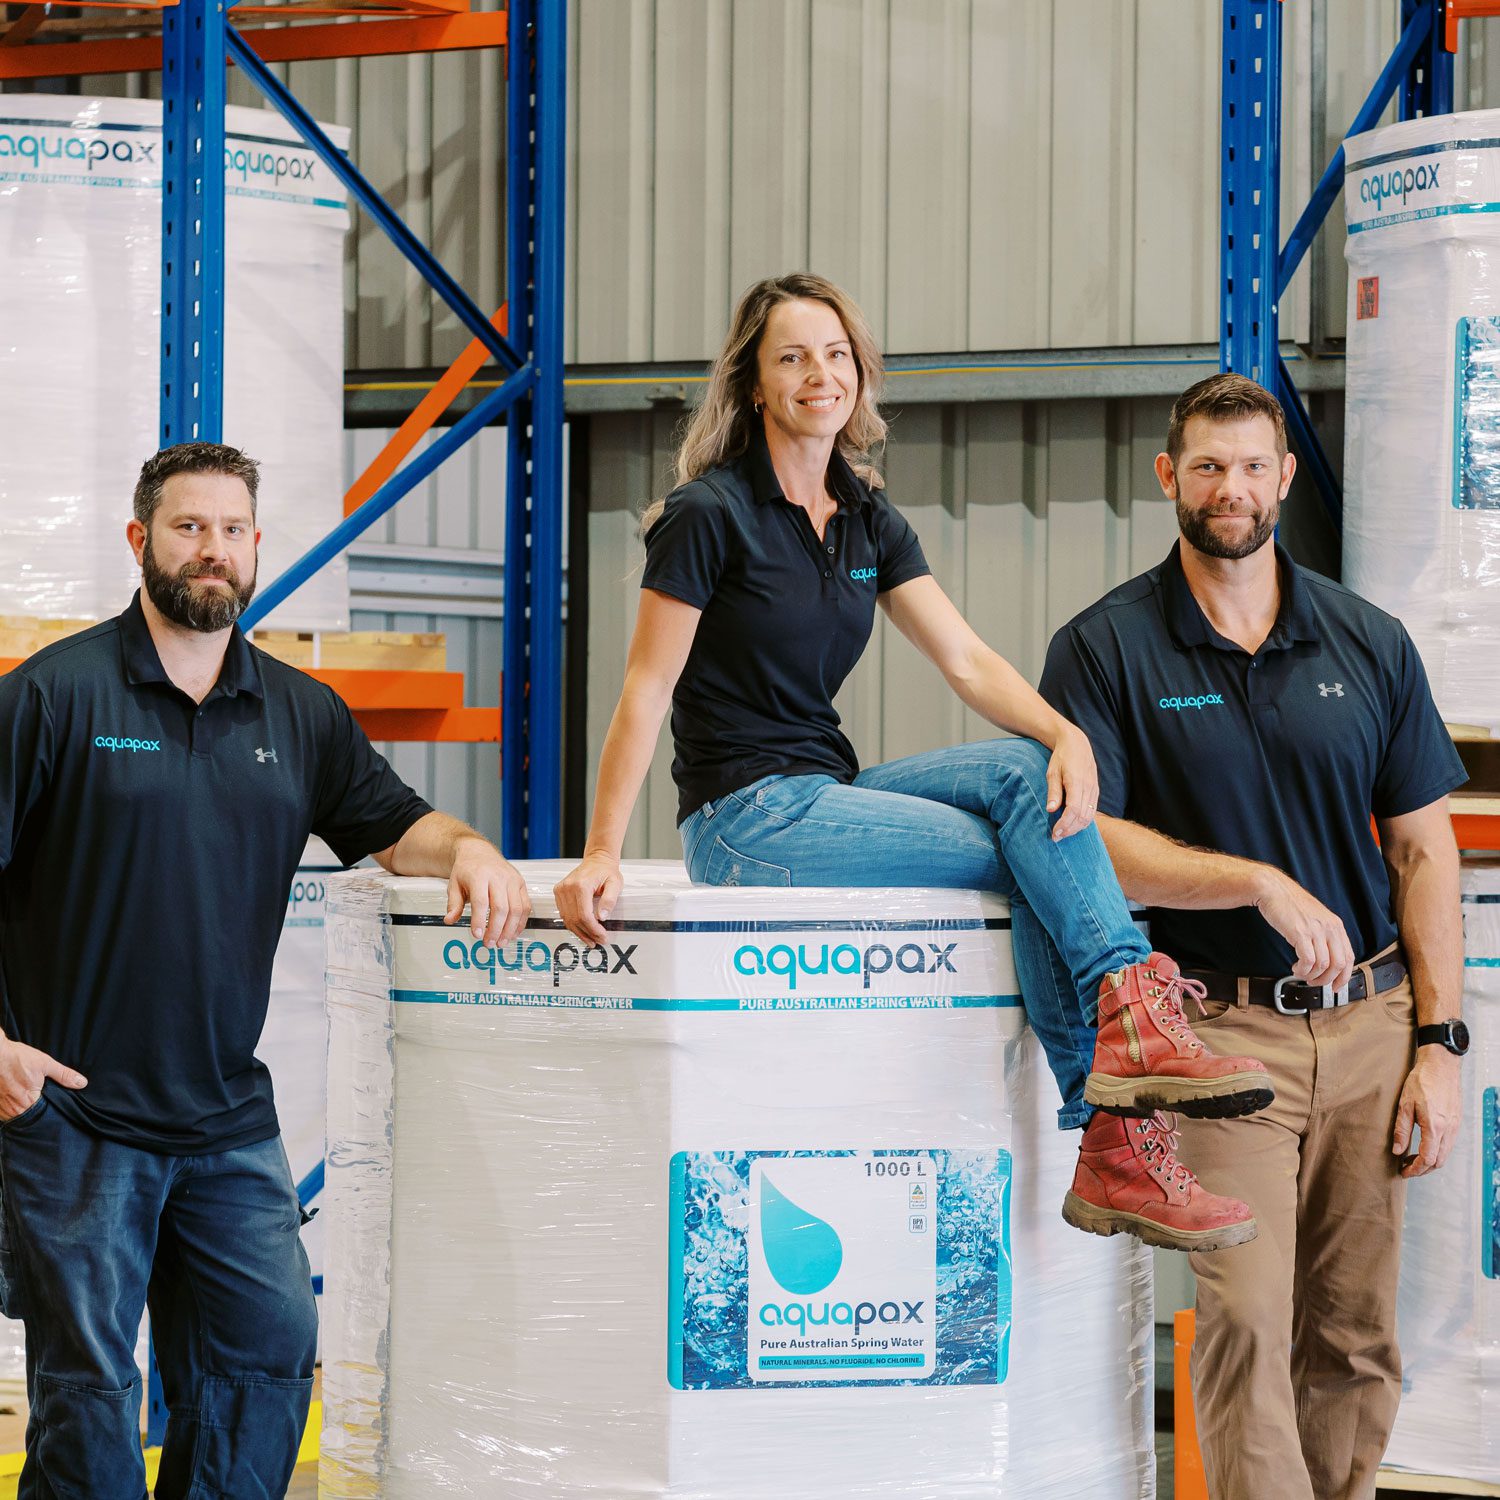 The Aquapax team smiling and sitting on a Water Pod